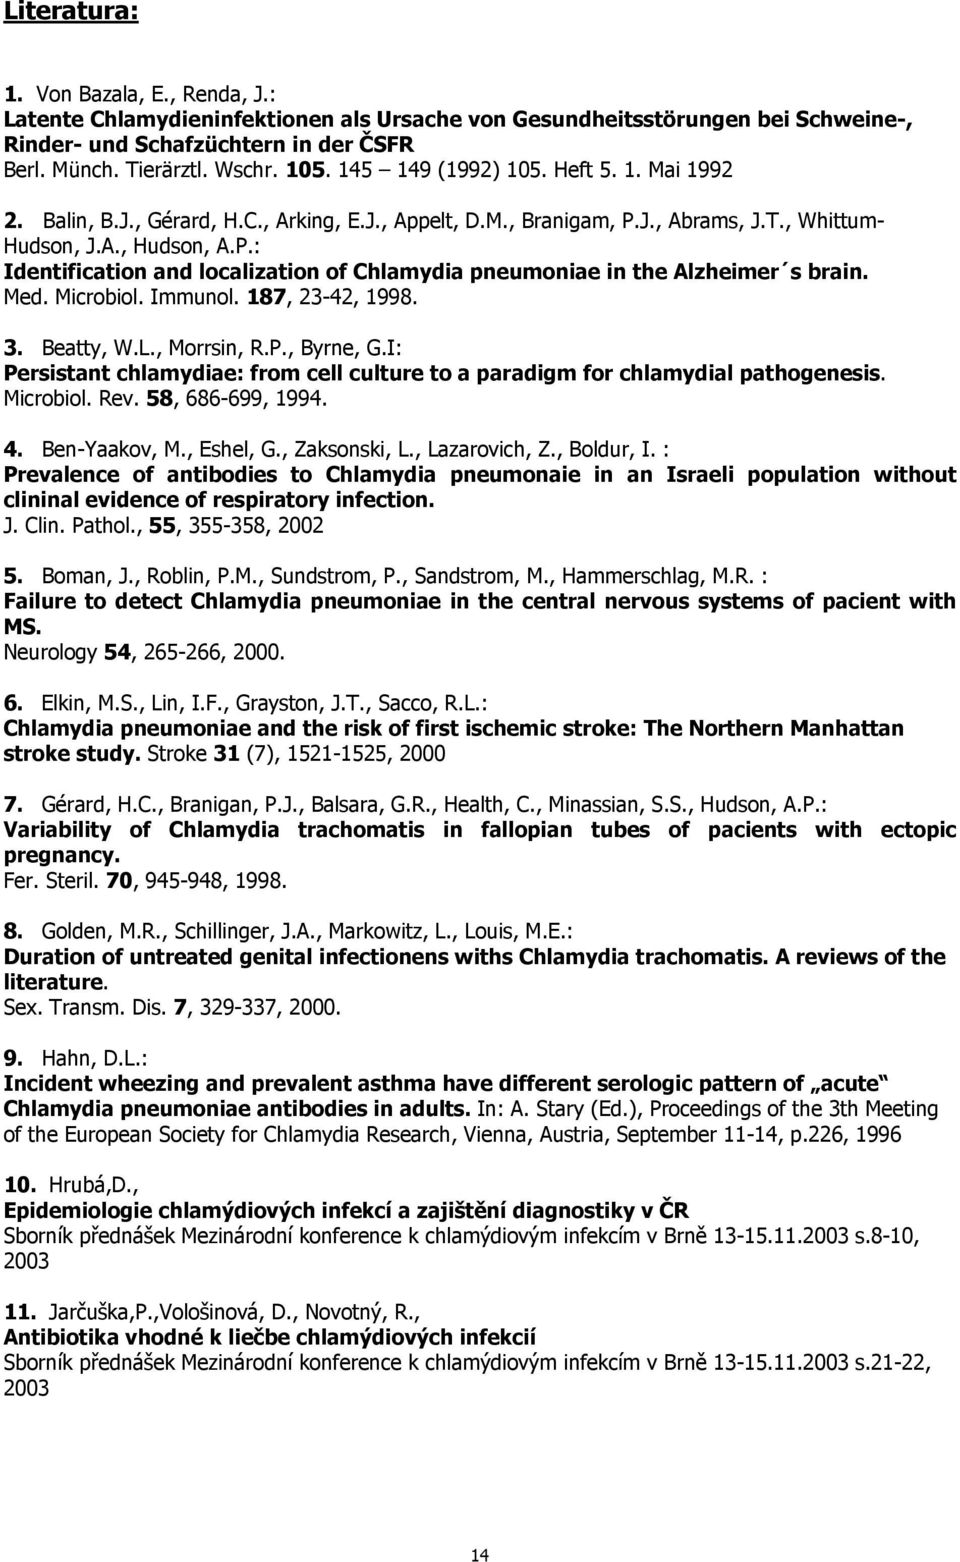 Med. Microbiol. Immunol. 187, 23-42, 1998. 3. Beatty, W.L., Morrsin, R.P., Byrne, G.I: Persistant chlamydiae: from cell culture to a paradigm for chlamydial pathogenesis. Microbiol. Rev.